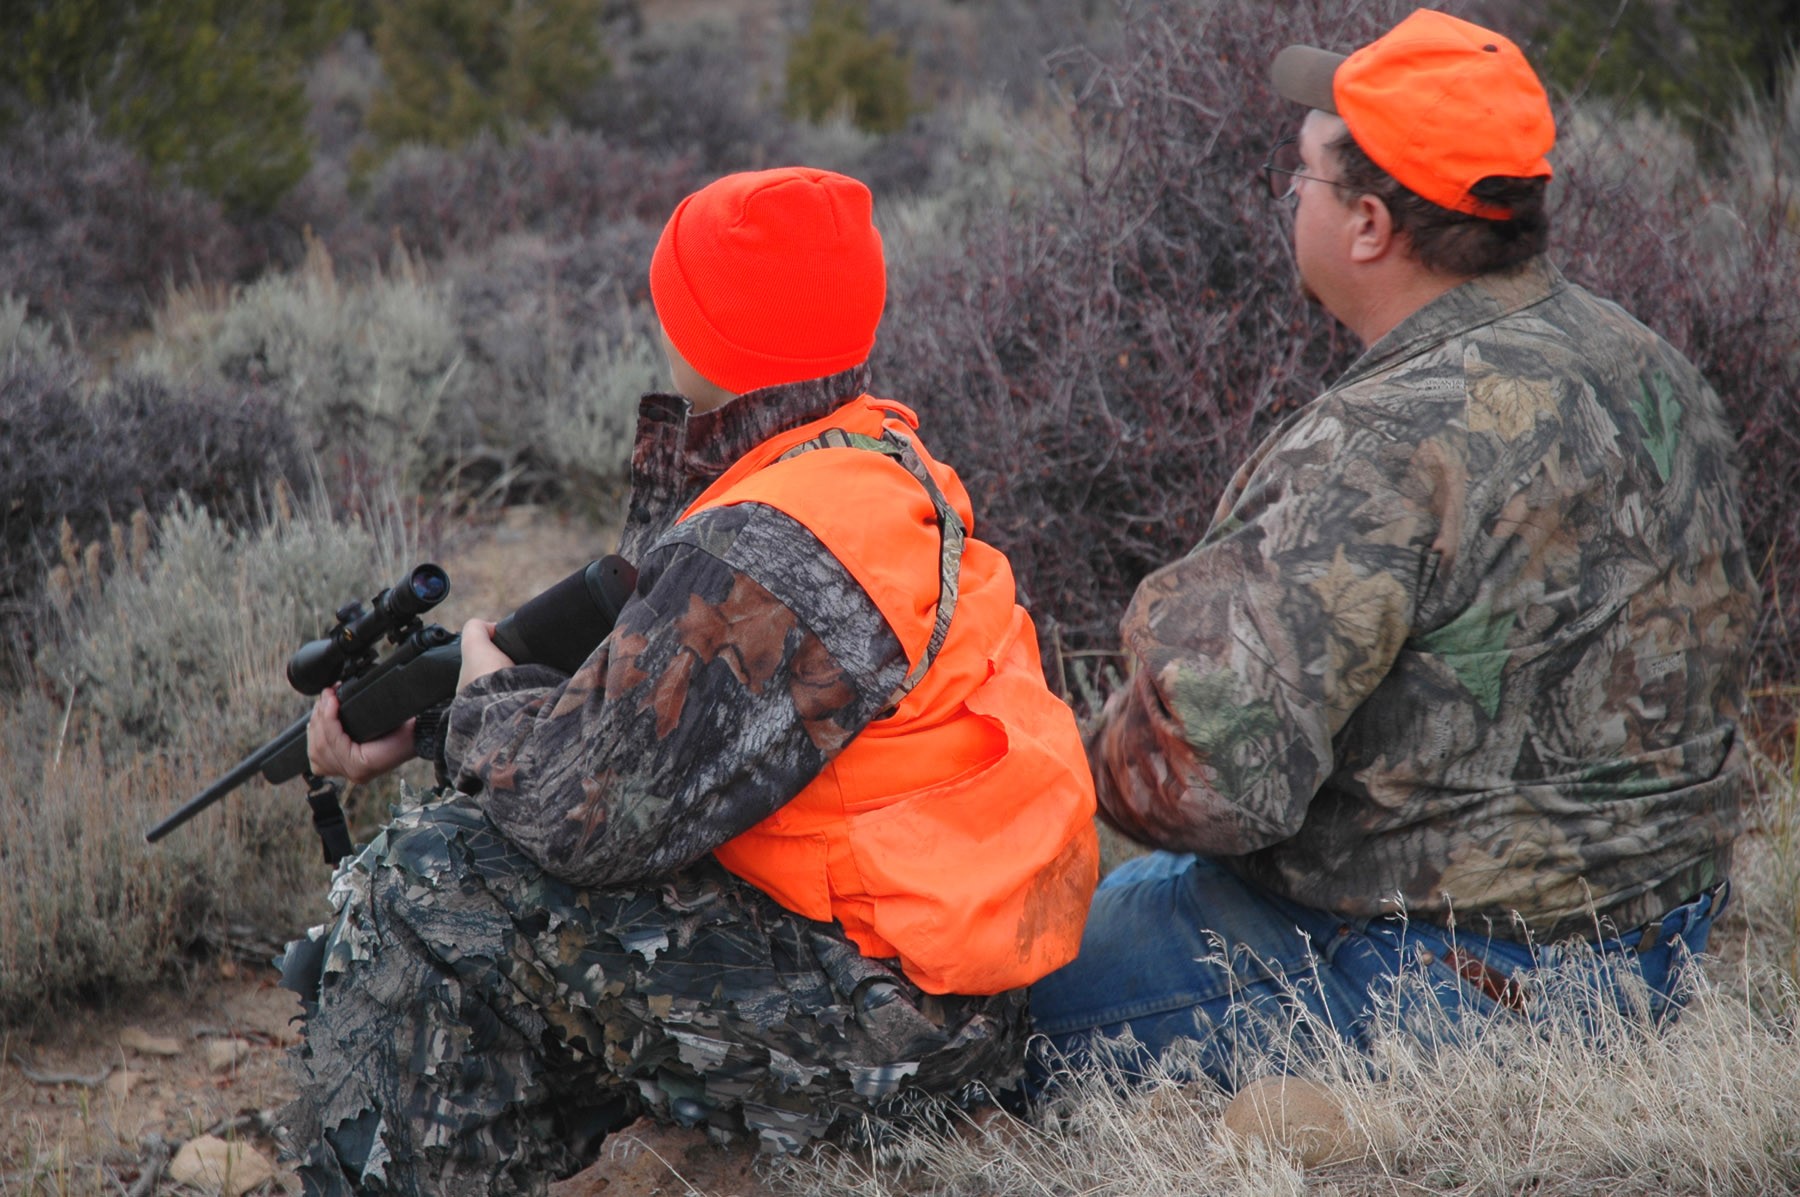 Hunting and fishing are pastimes enjoyed by 82 million Americans